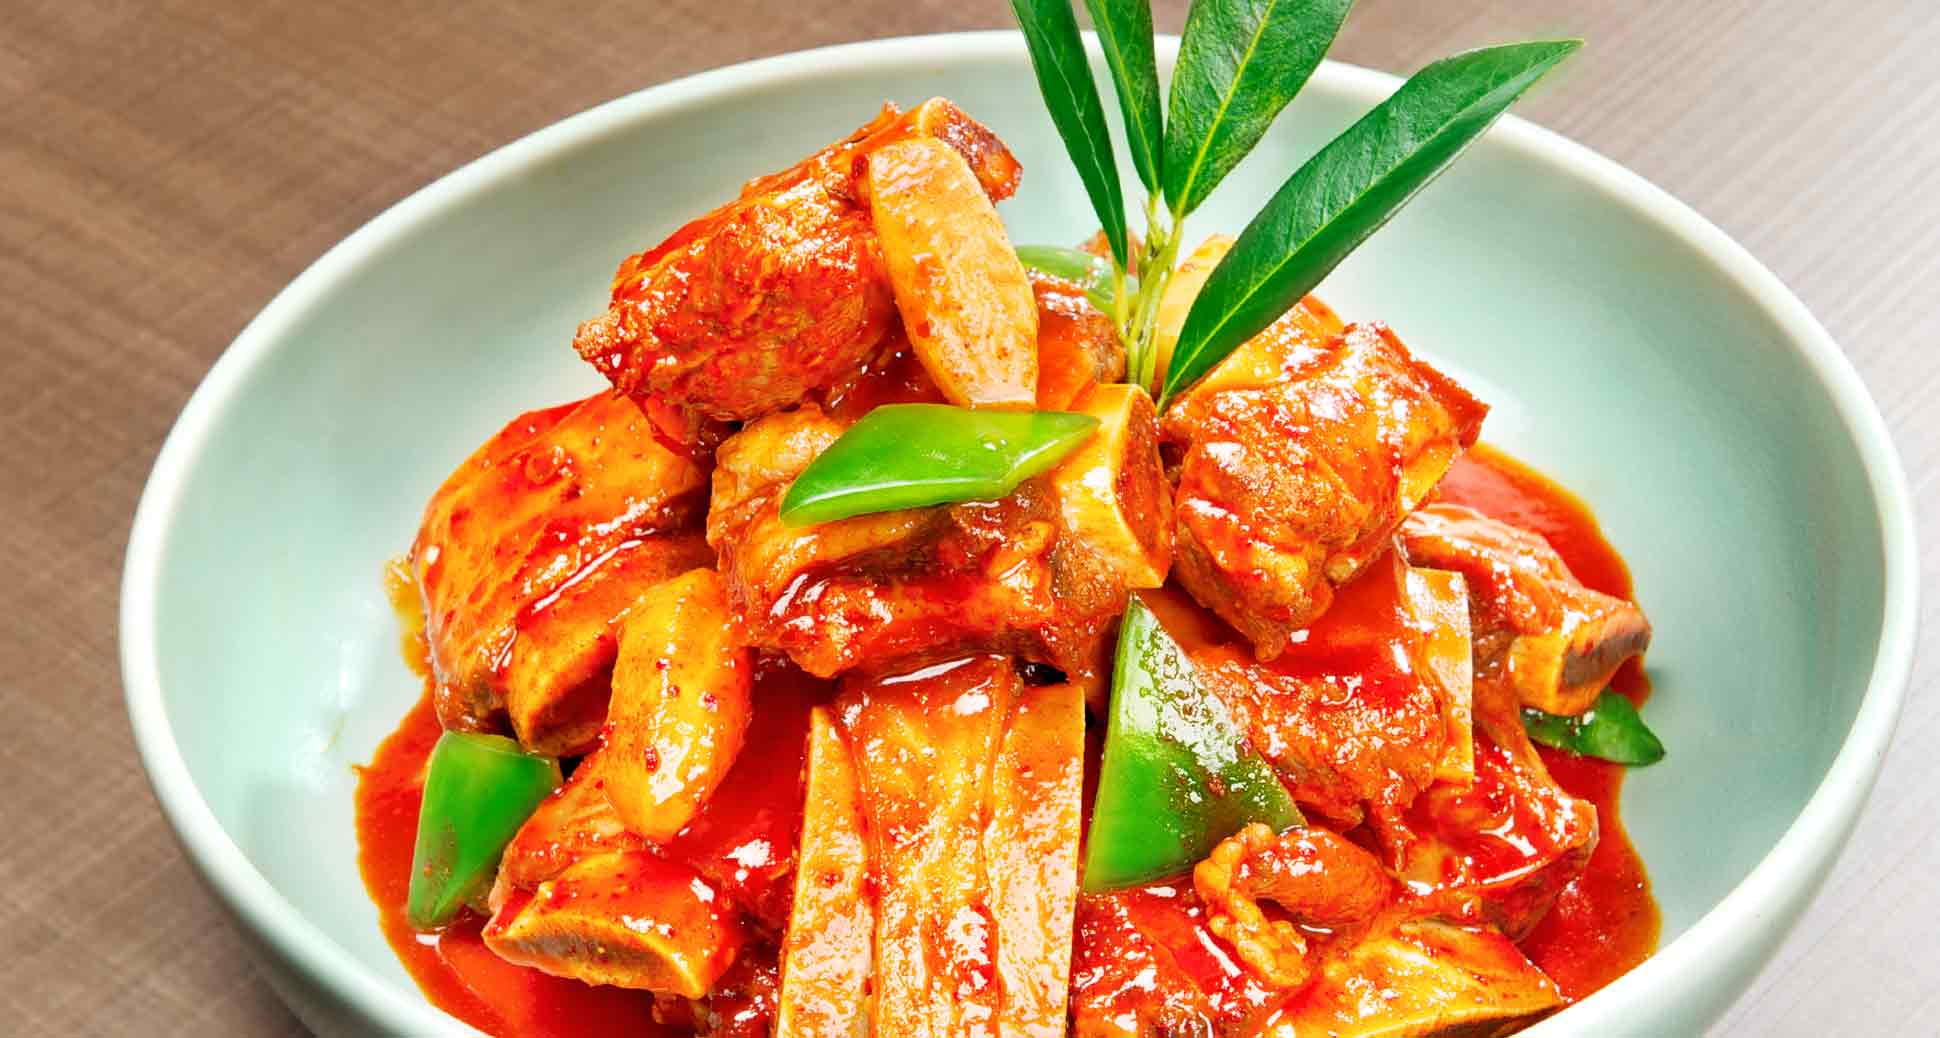 Sweating out to actually cool down: spicy galbi–jjim